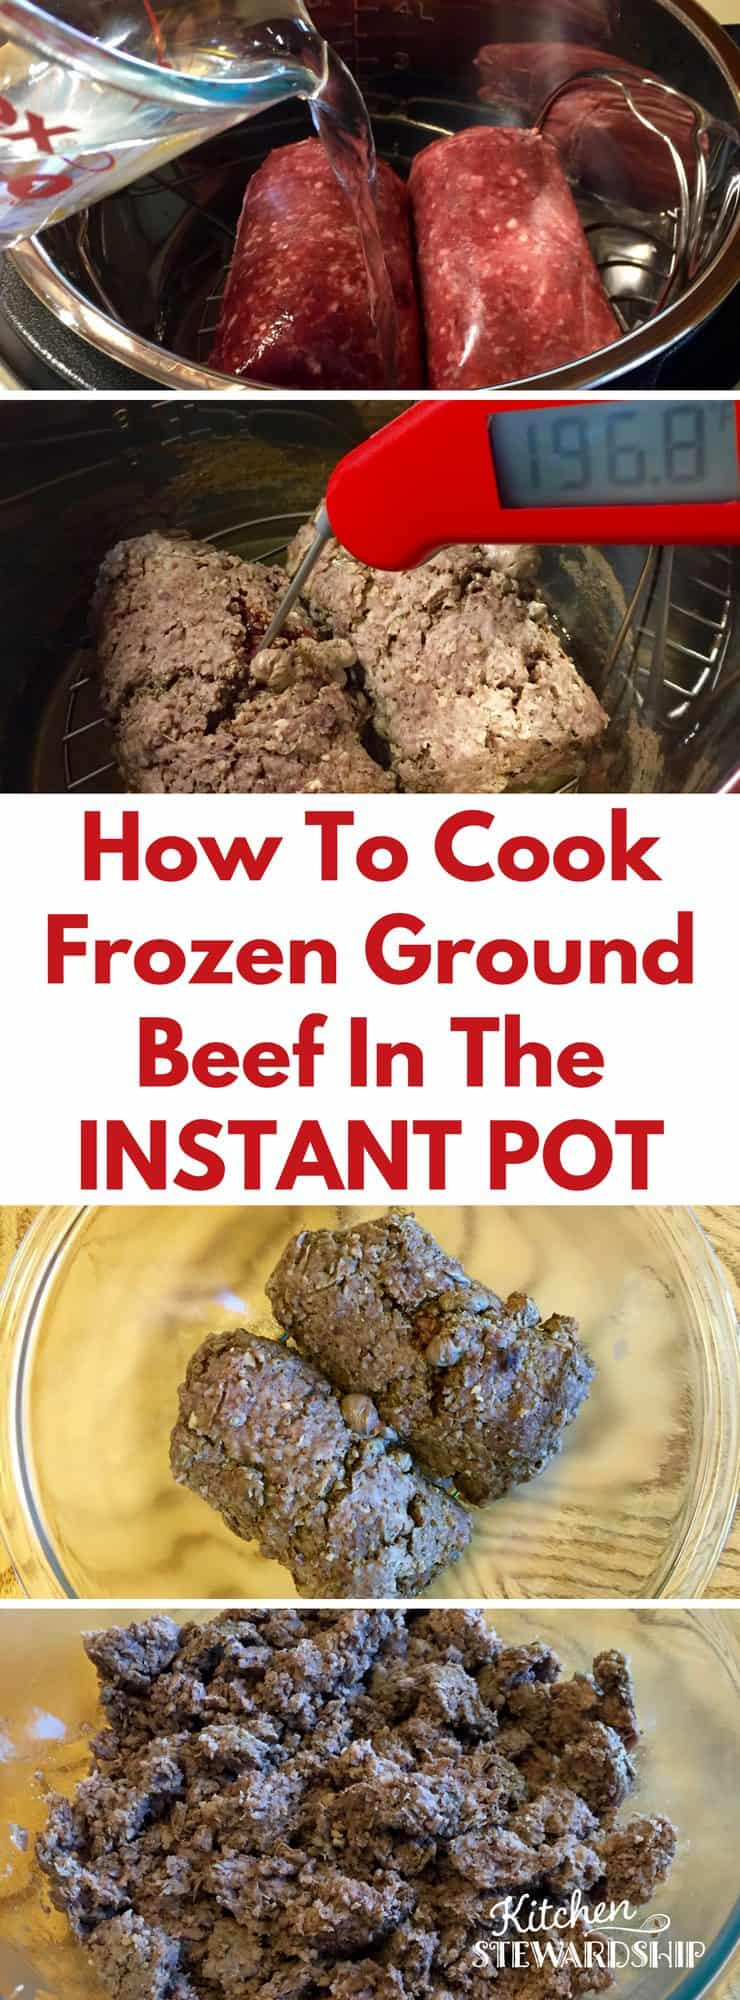 Cooking Ground Beef In Microwave
 How to Cook FROZEN Ground Beef in the Instant Pot Pressure